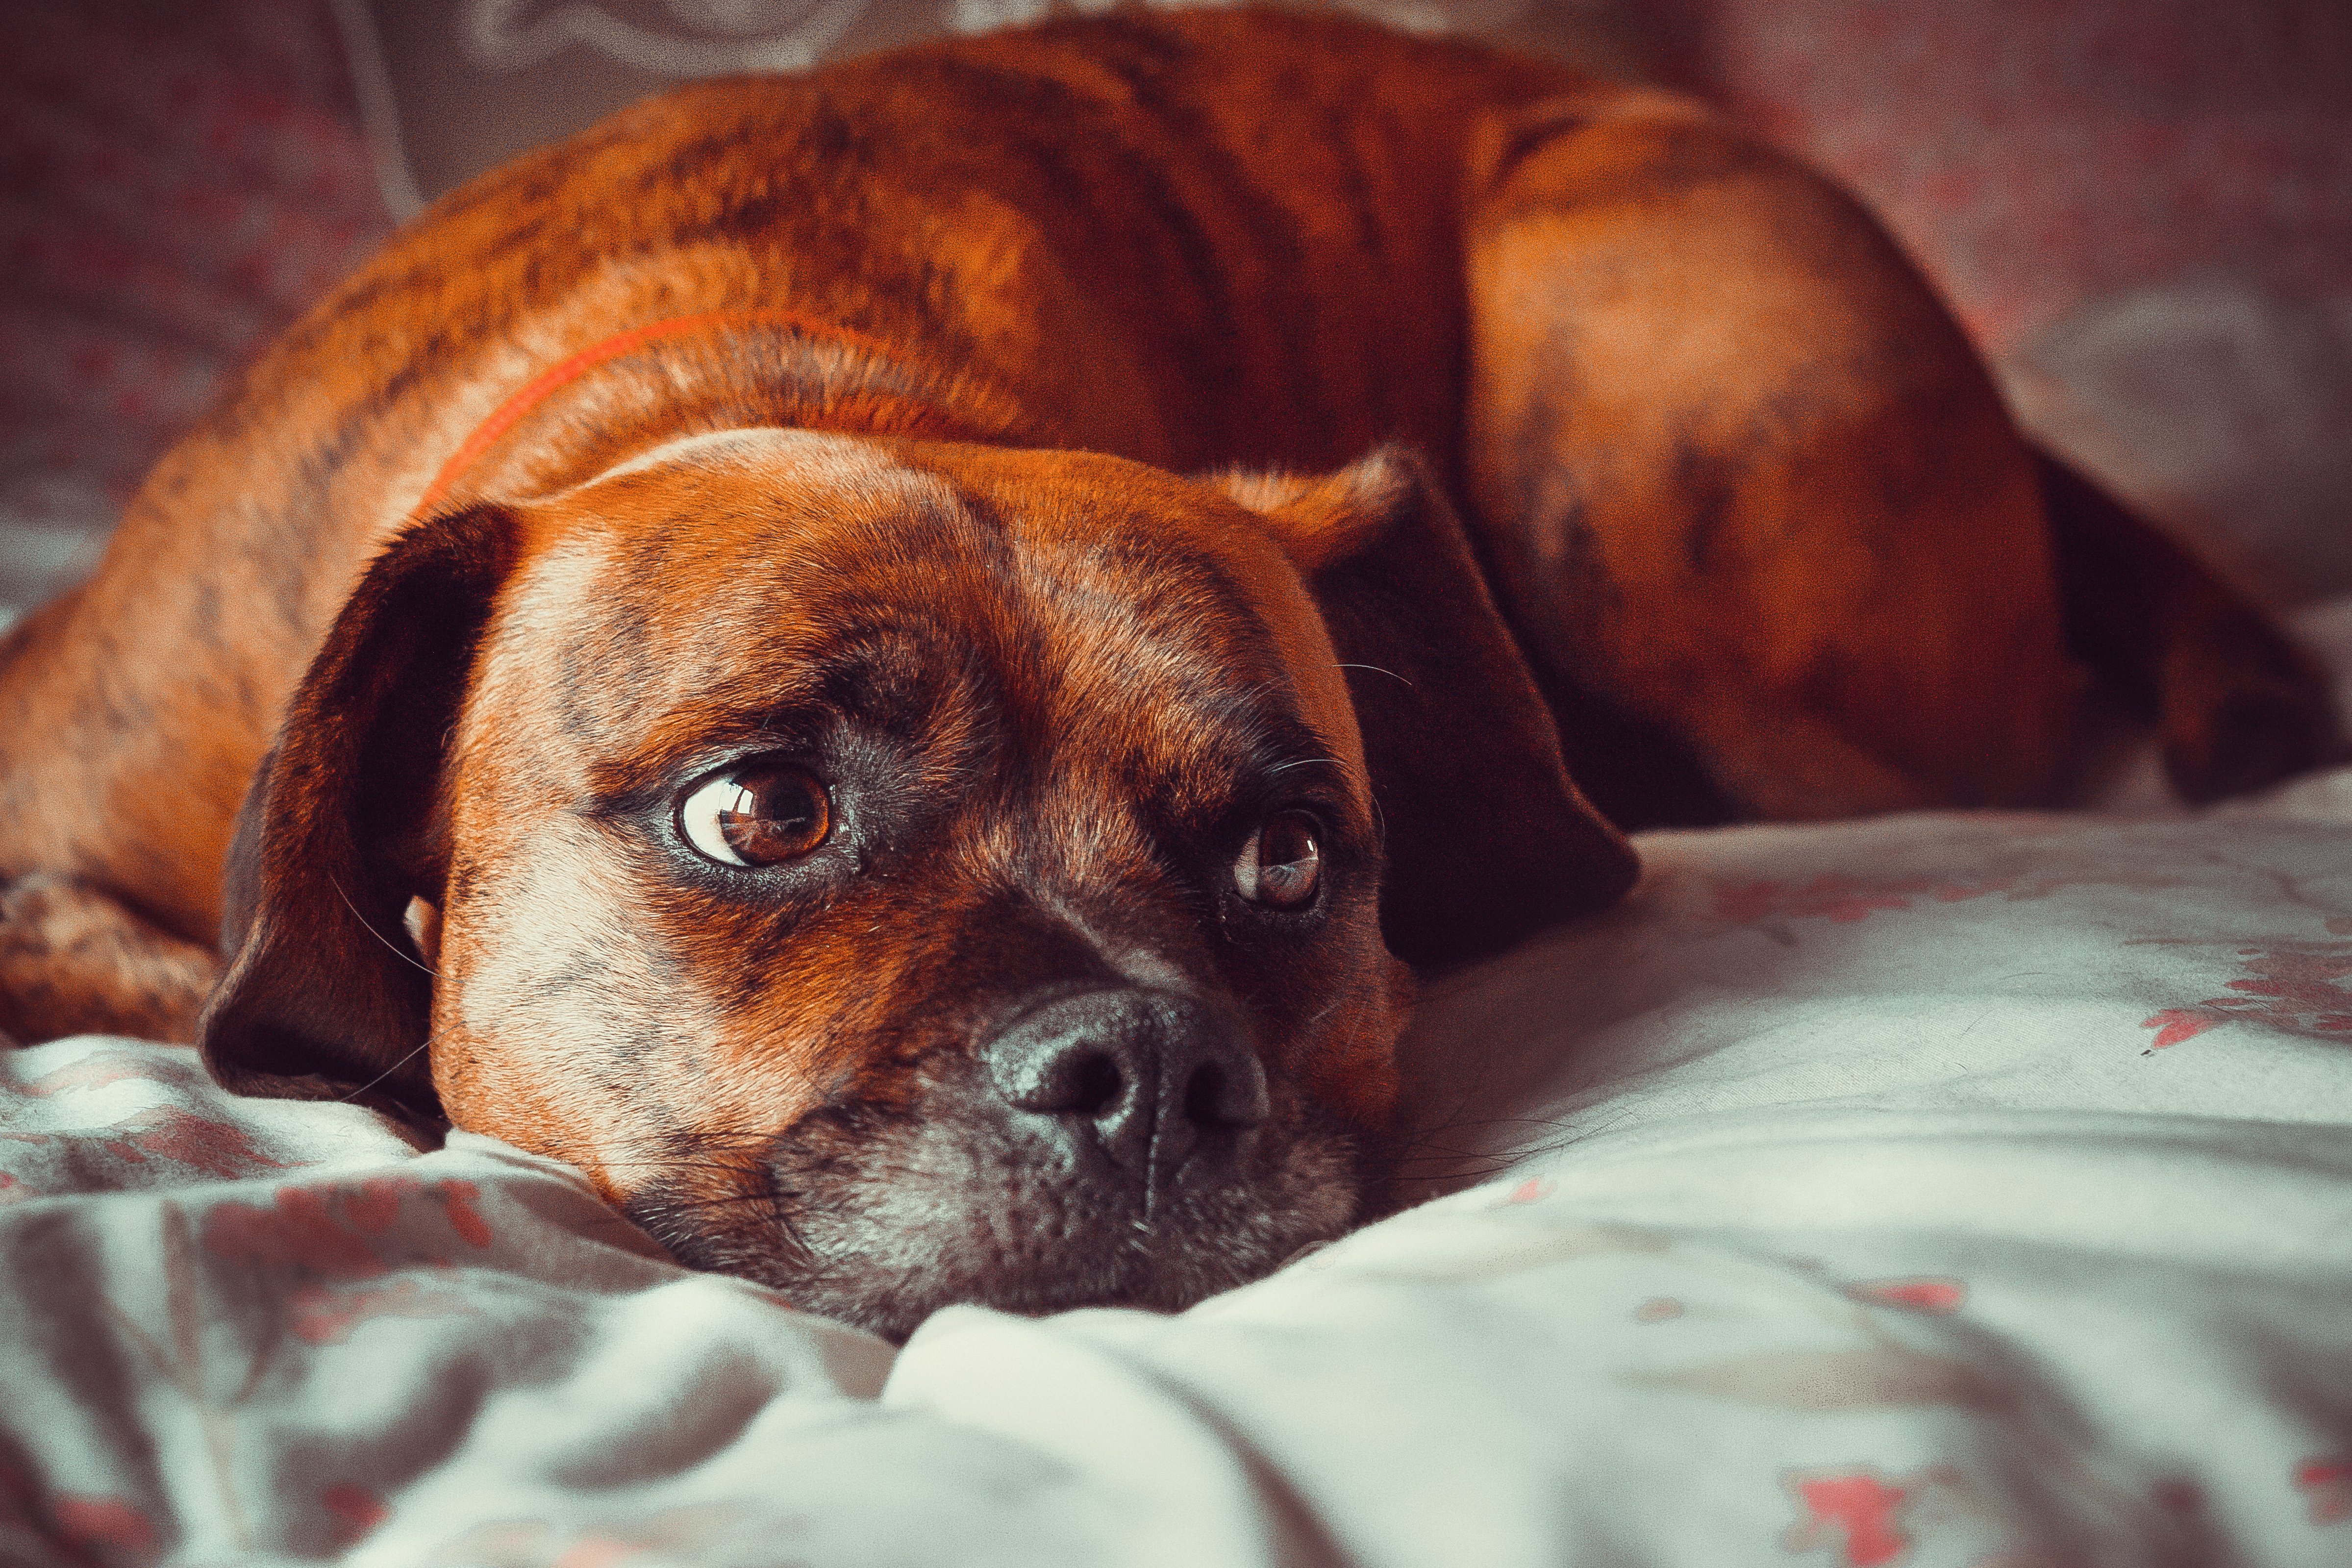 A dog looks sad while lying on a bed. | Photo: Shutterstock